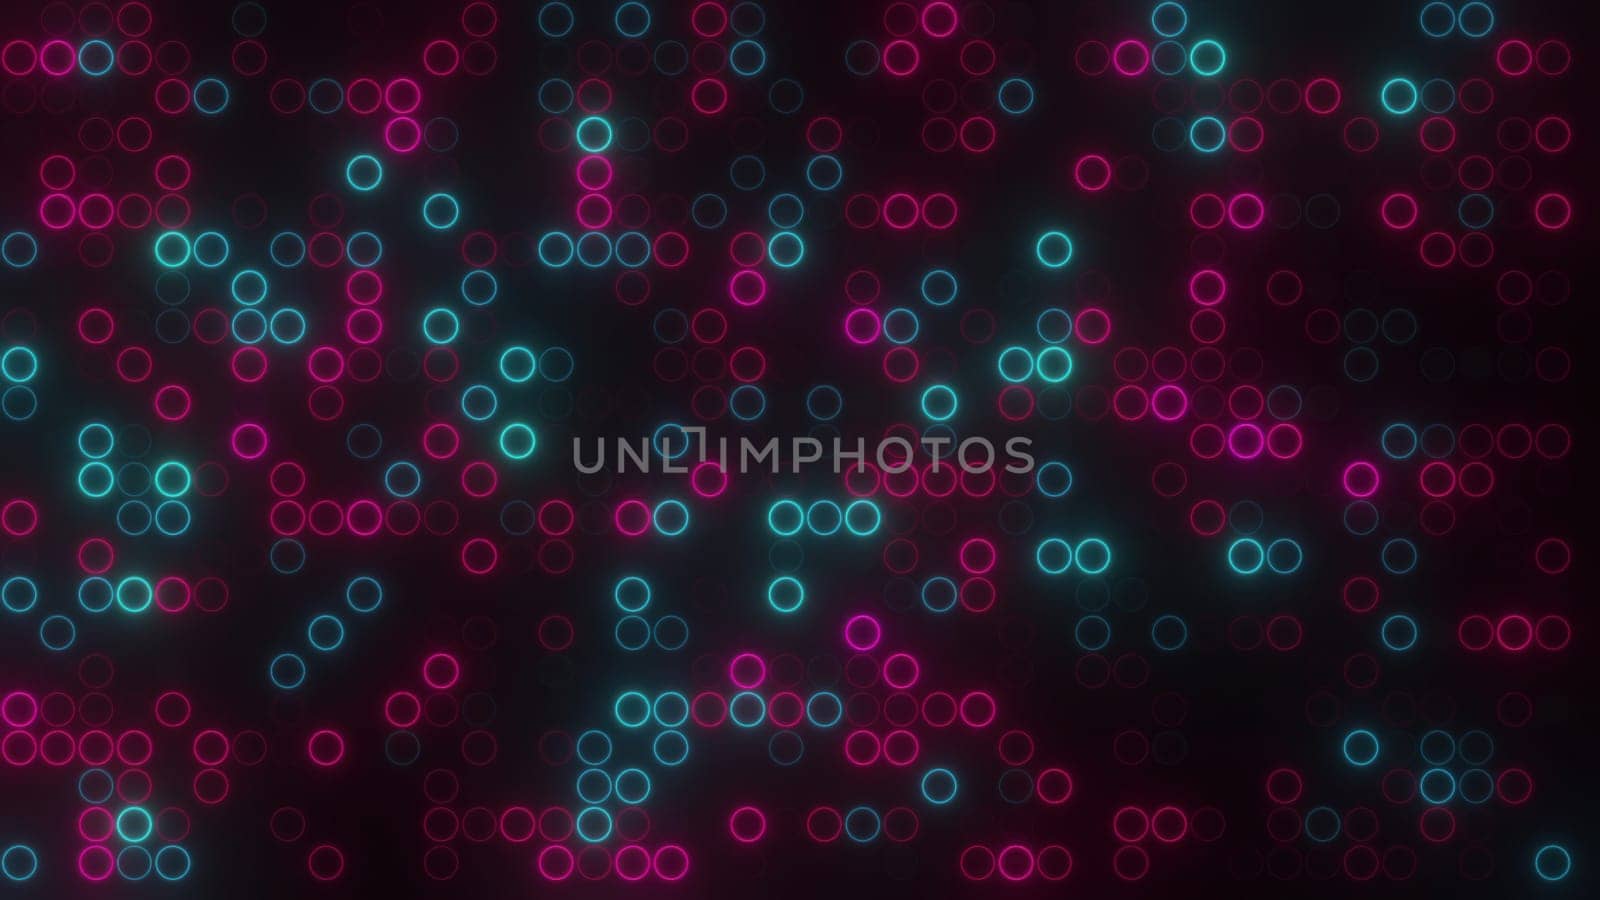 Abstract digital dots. Computer generated 3d render